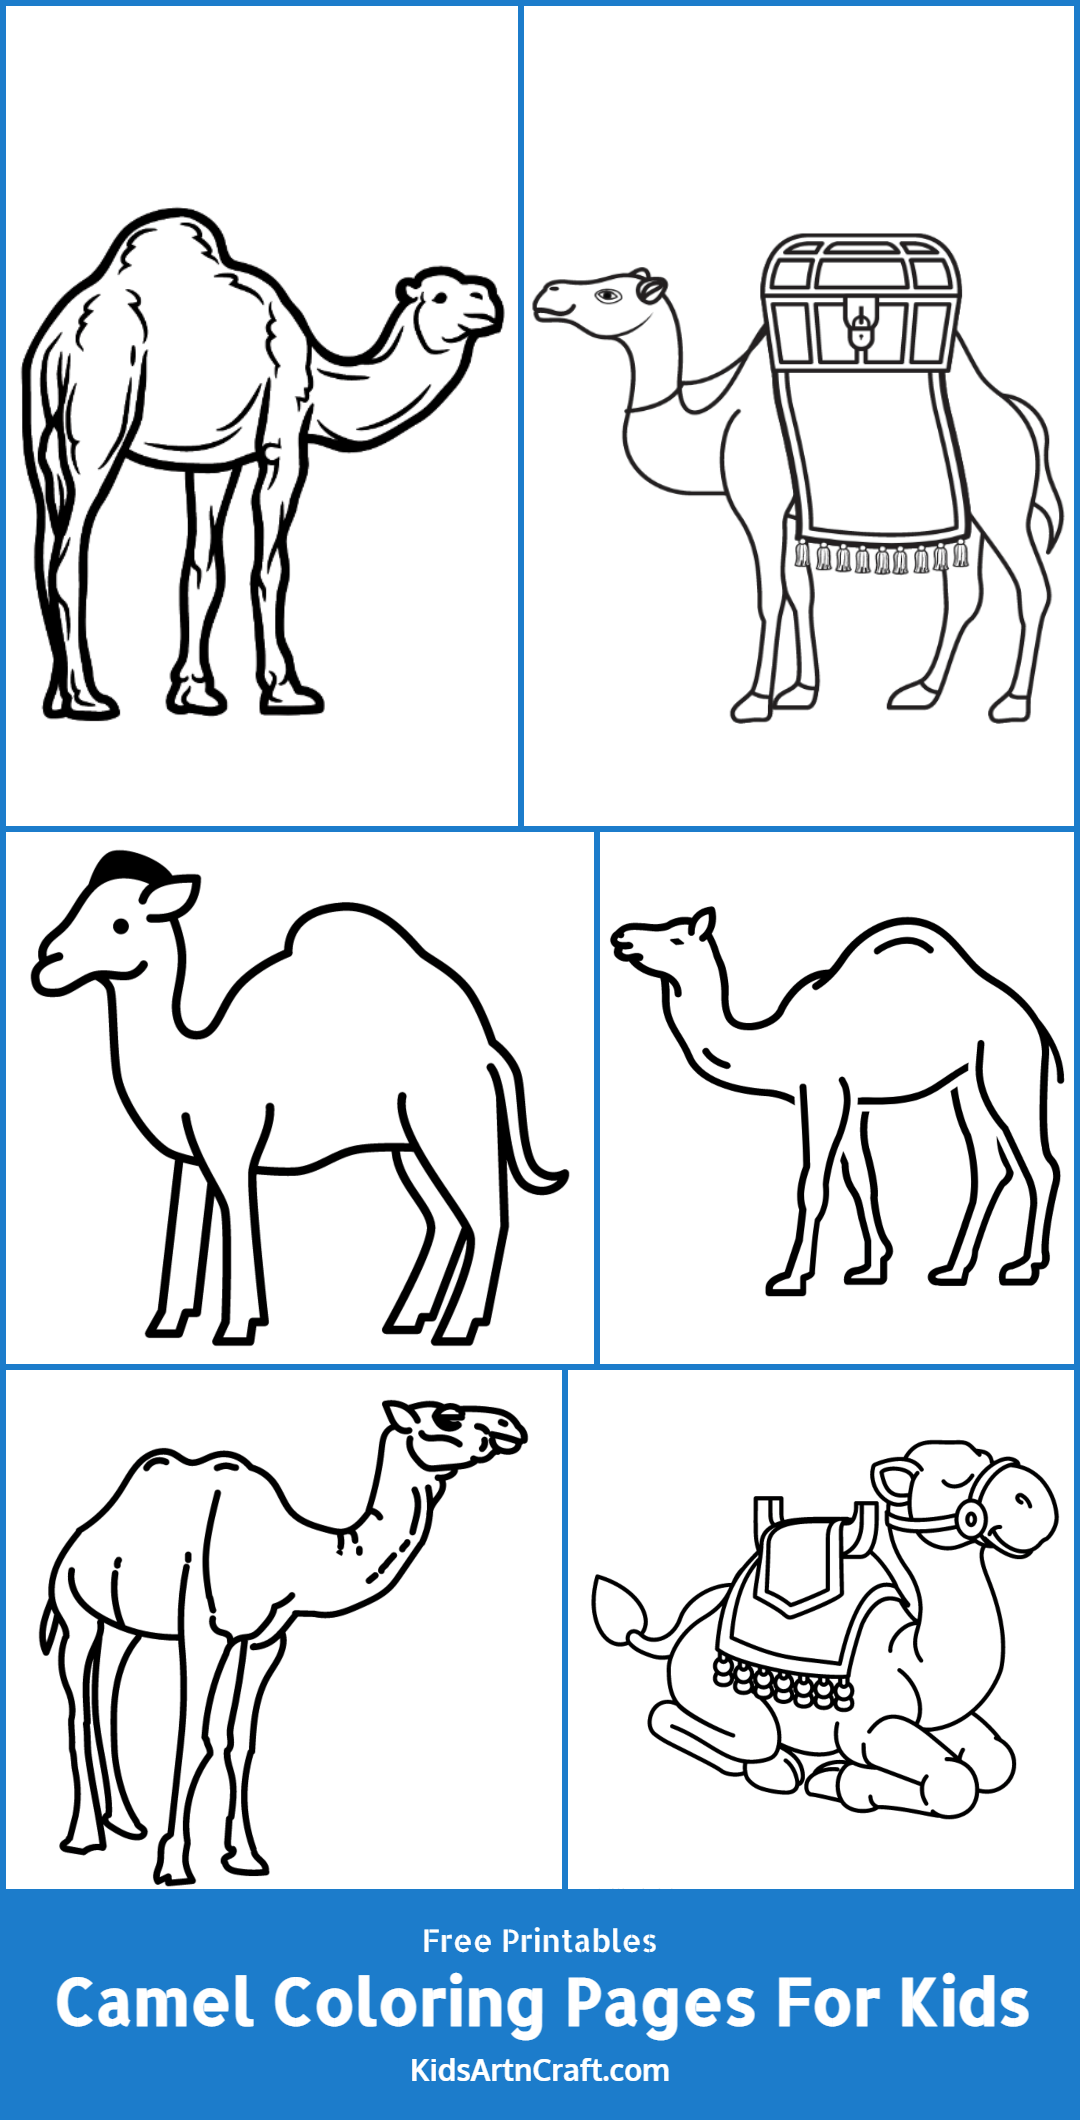 Camel Coloring Pages for Kids – Free Printables